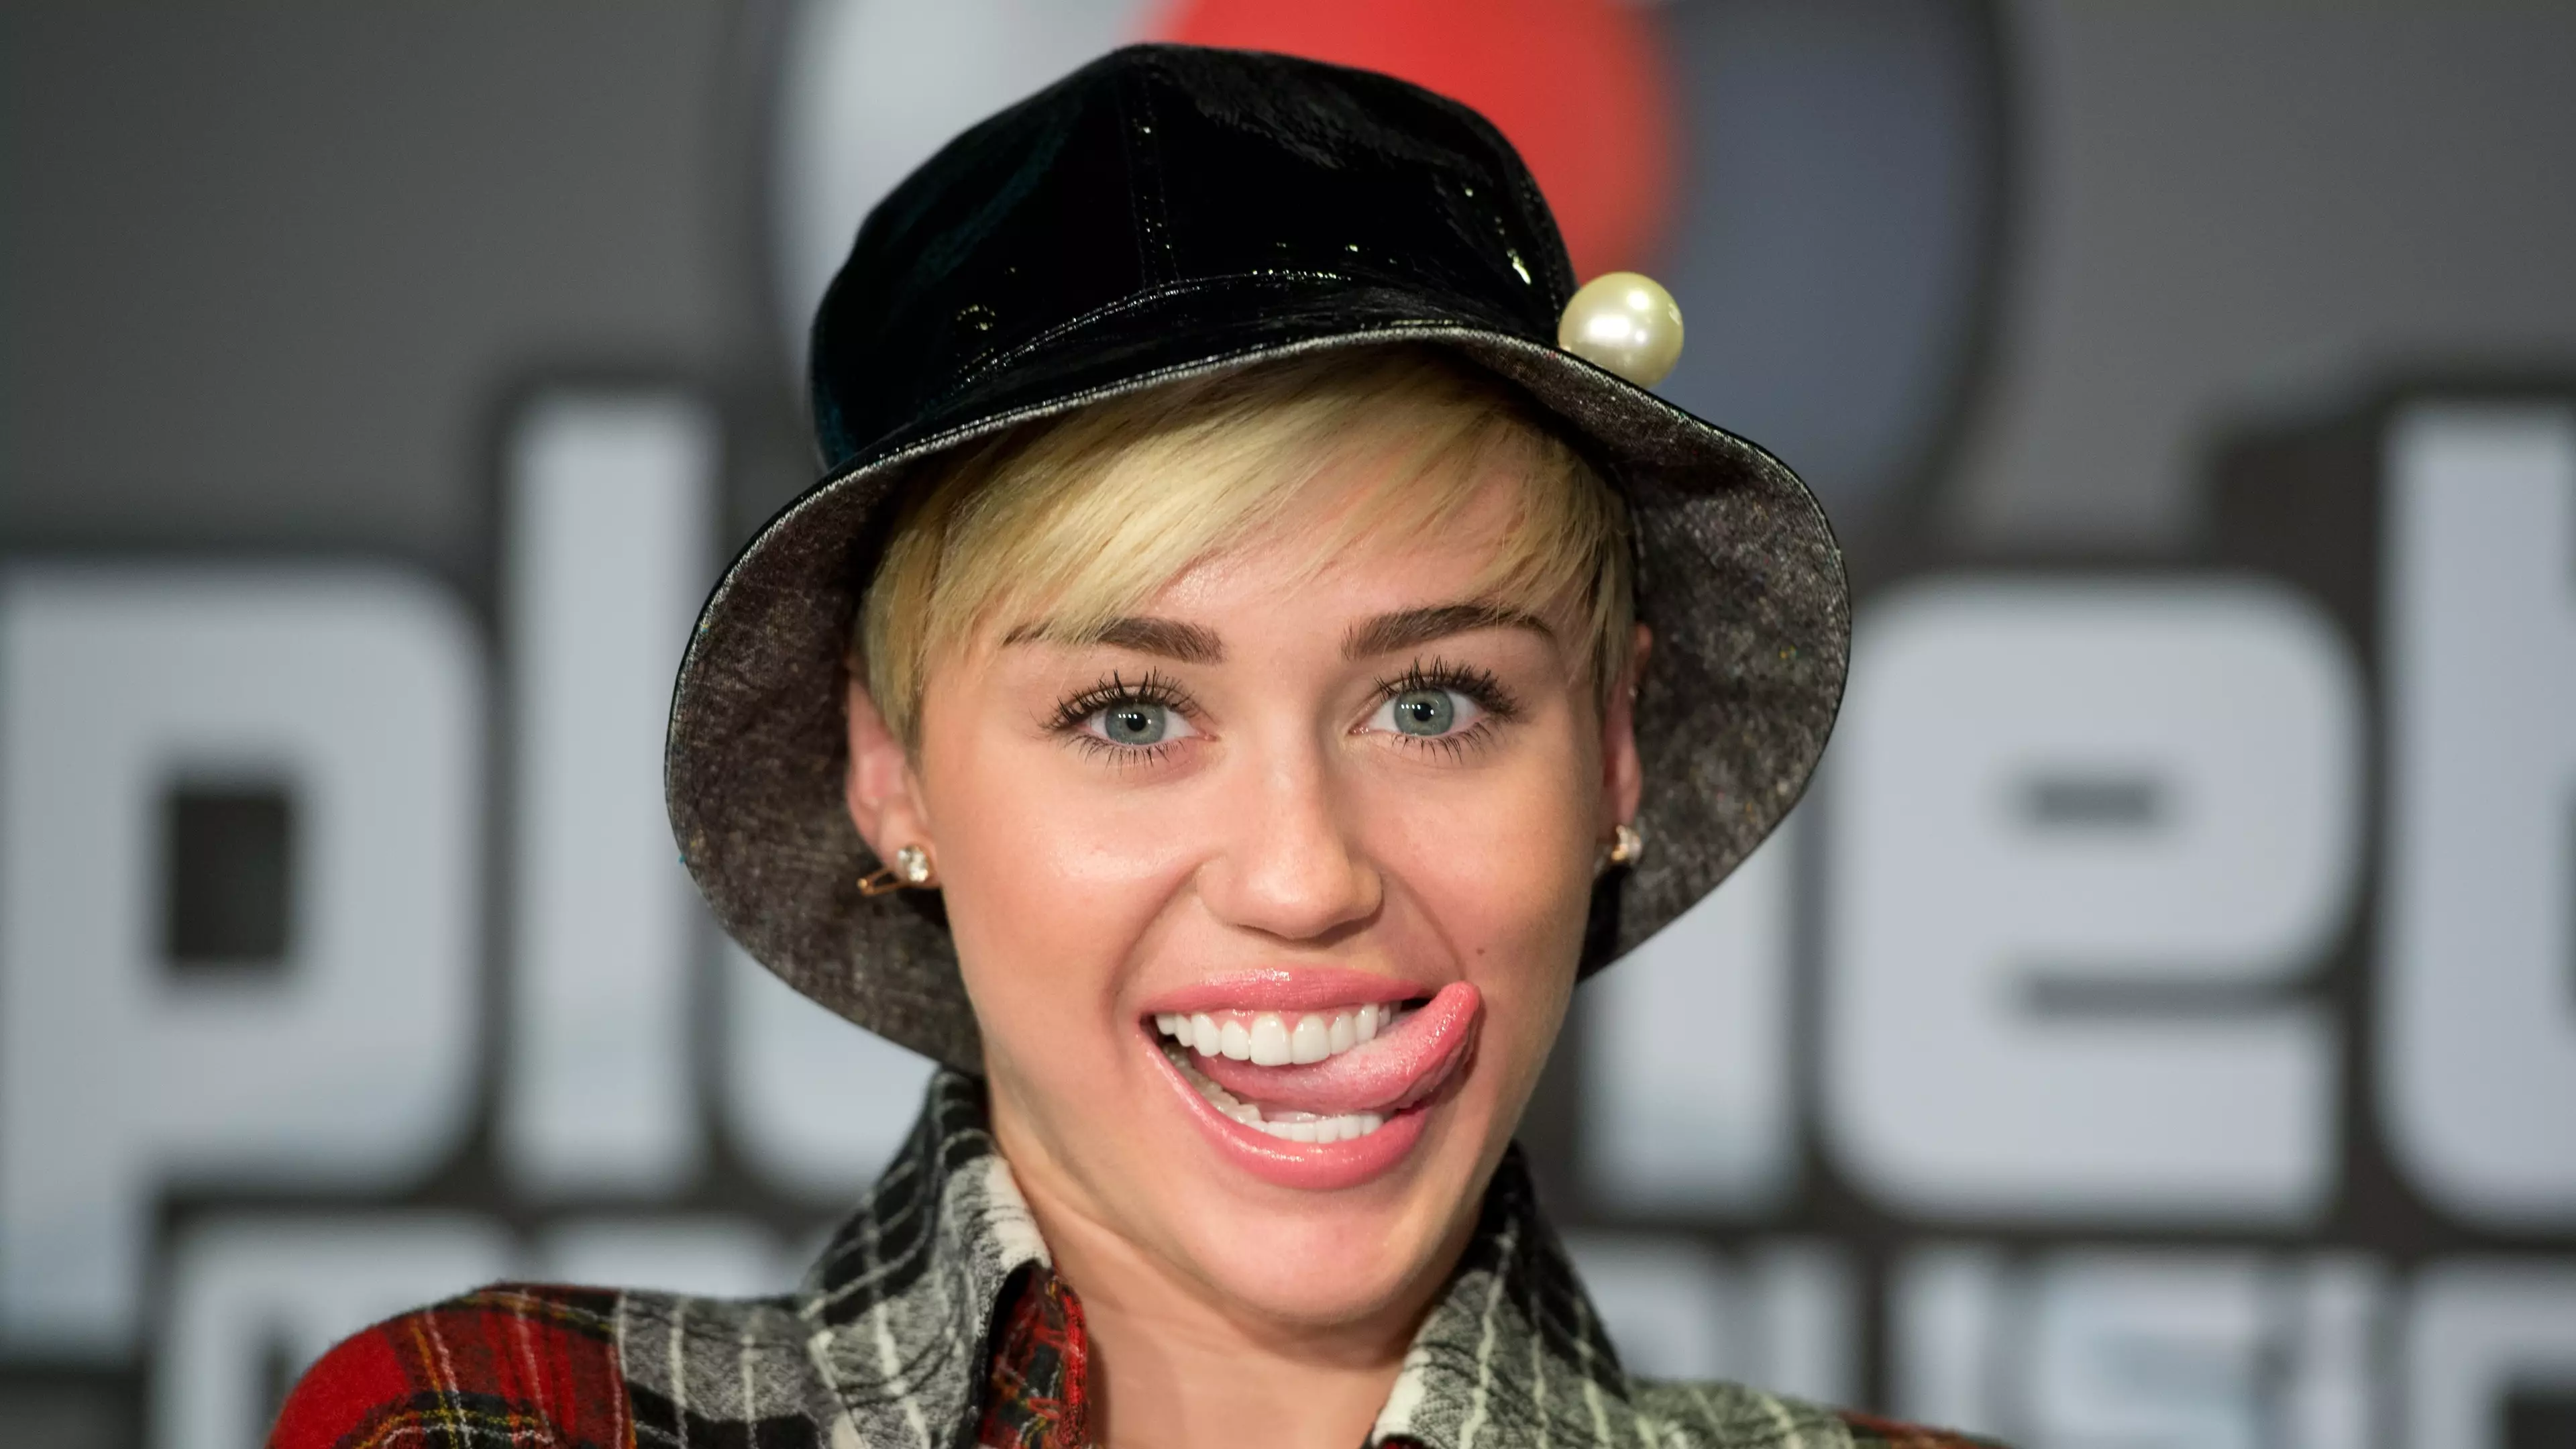 Miley Cyrus 'Takes Back' Apology For Posing 'Nude' 10 Years Ago 